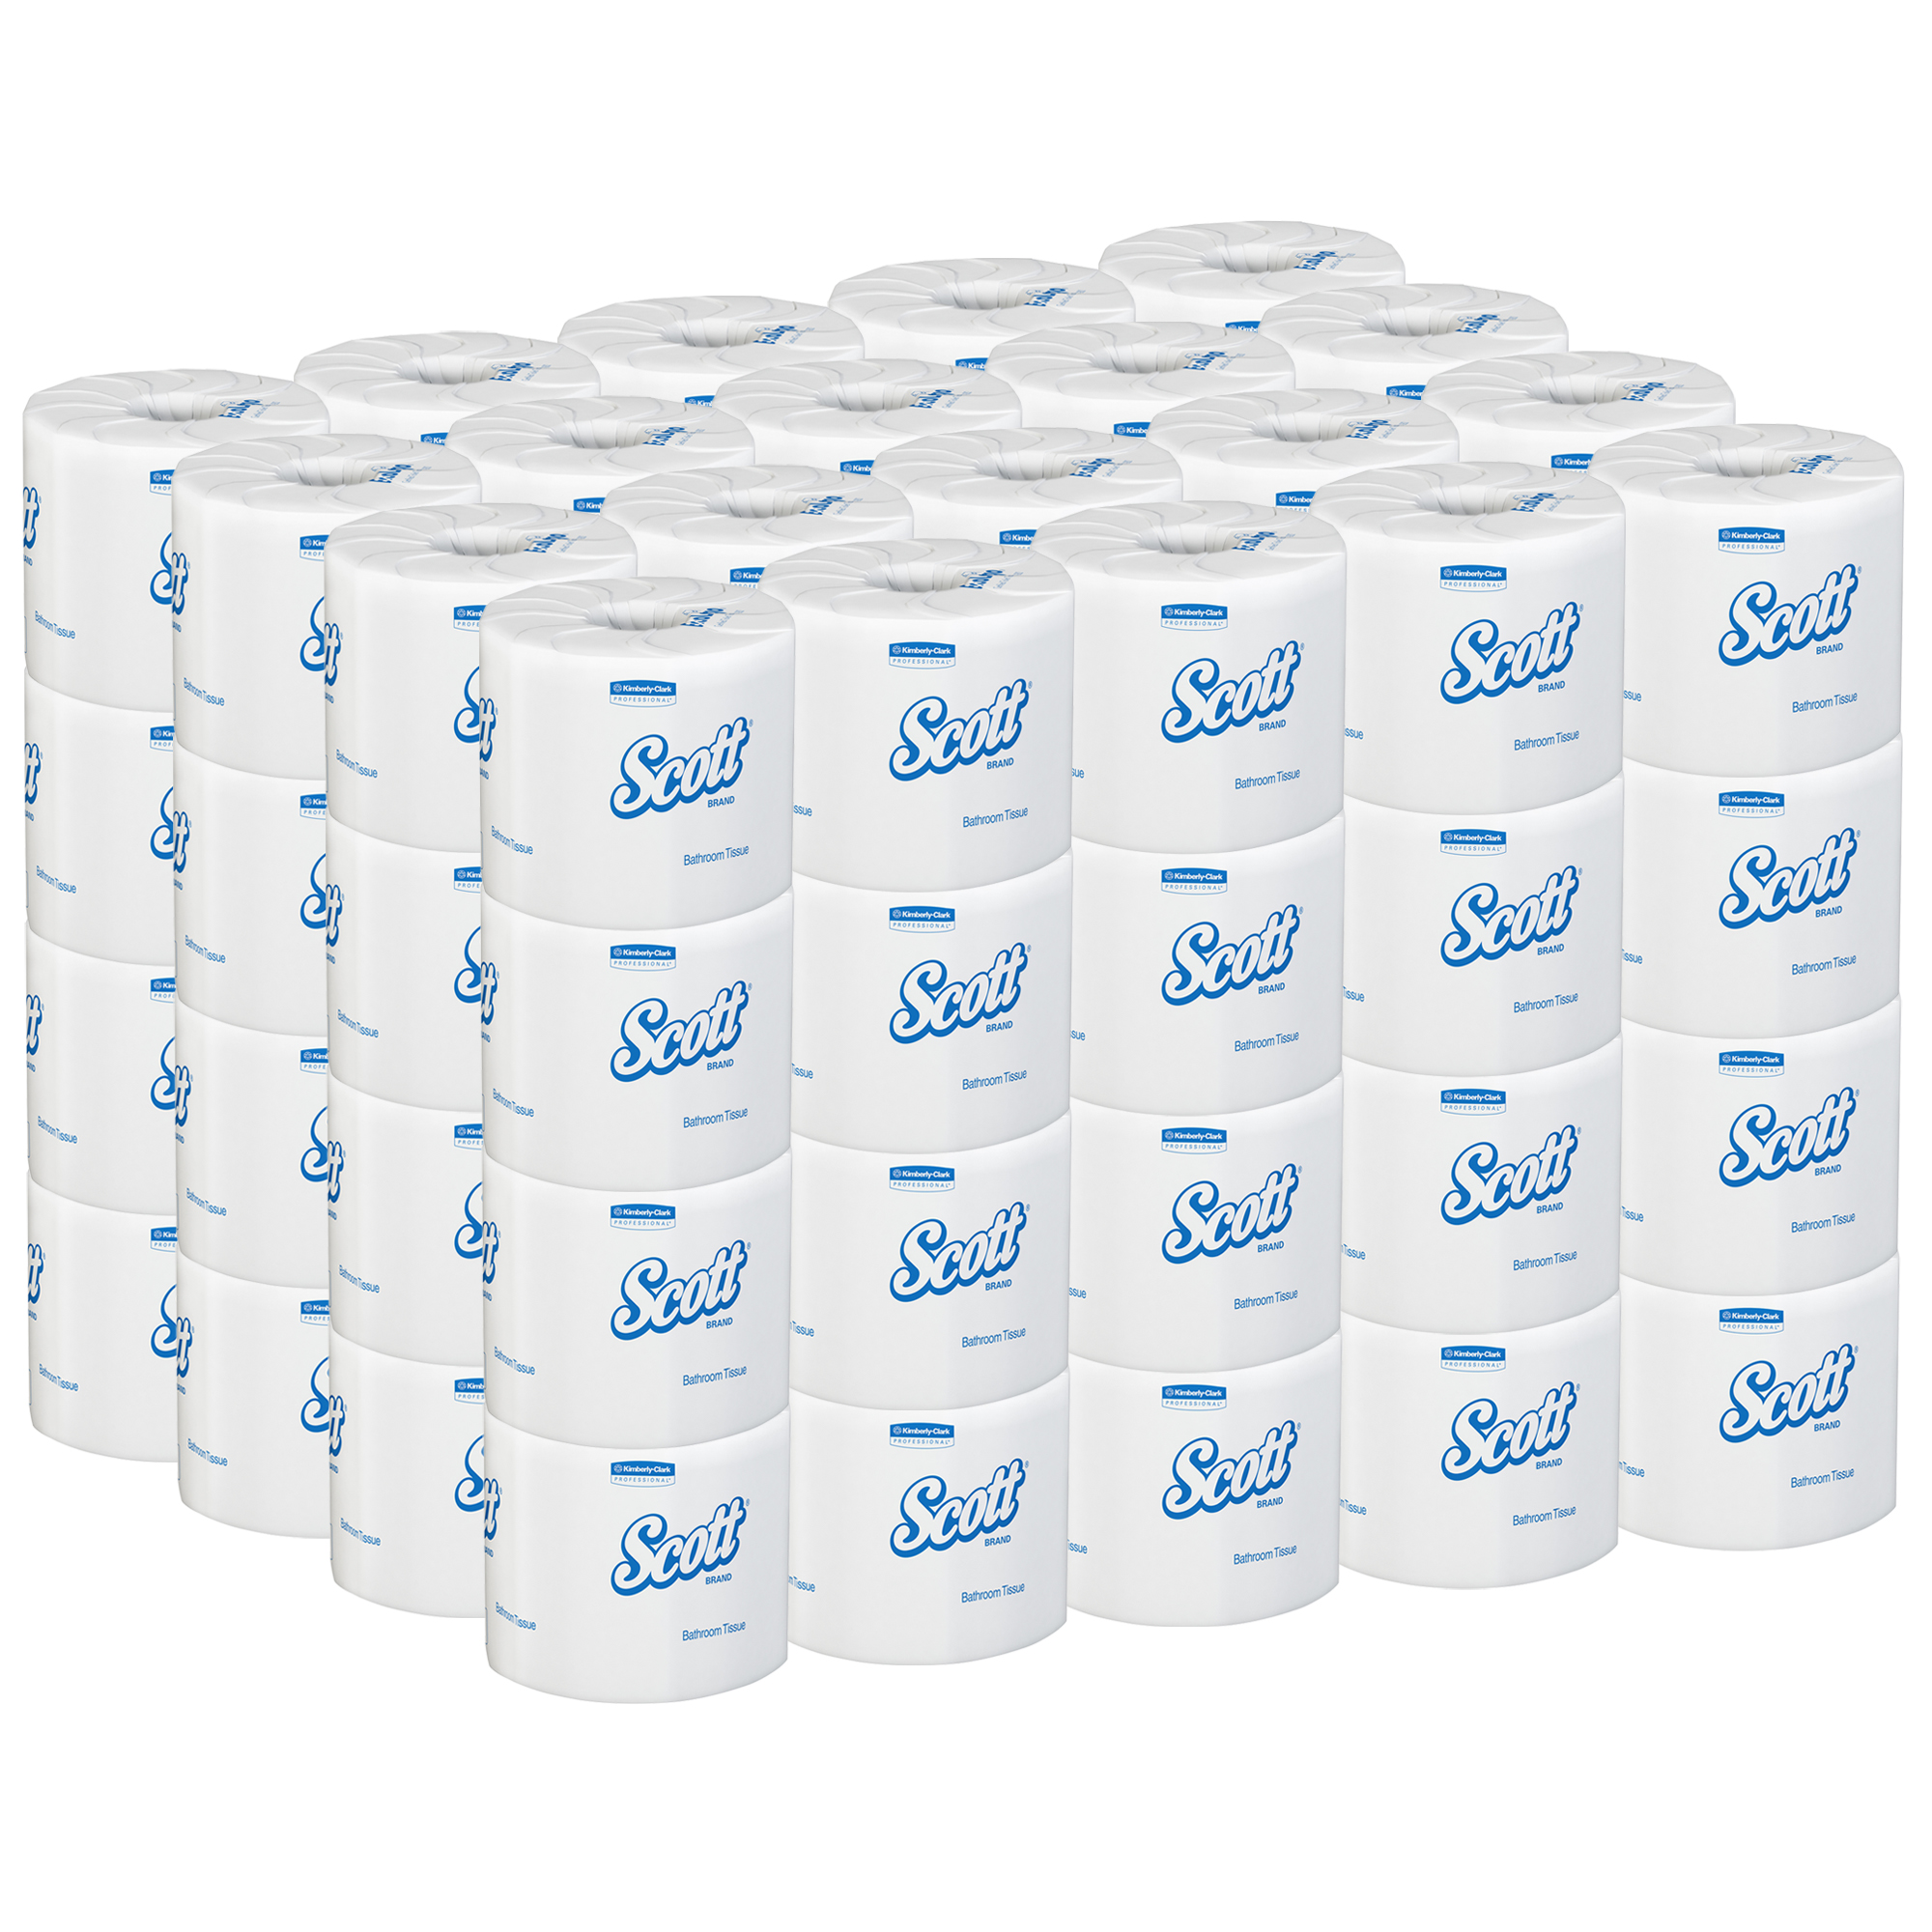 Picture of 100% Recycled Fiber Toilet Tissue, 2-Ply, 506 Sheets/Roll, 80/Carton